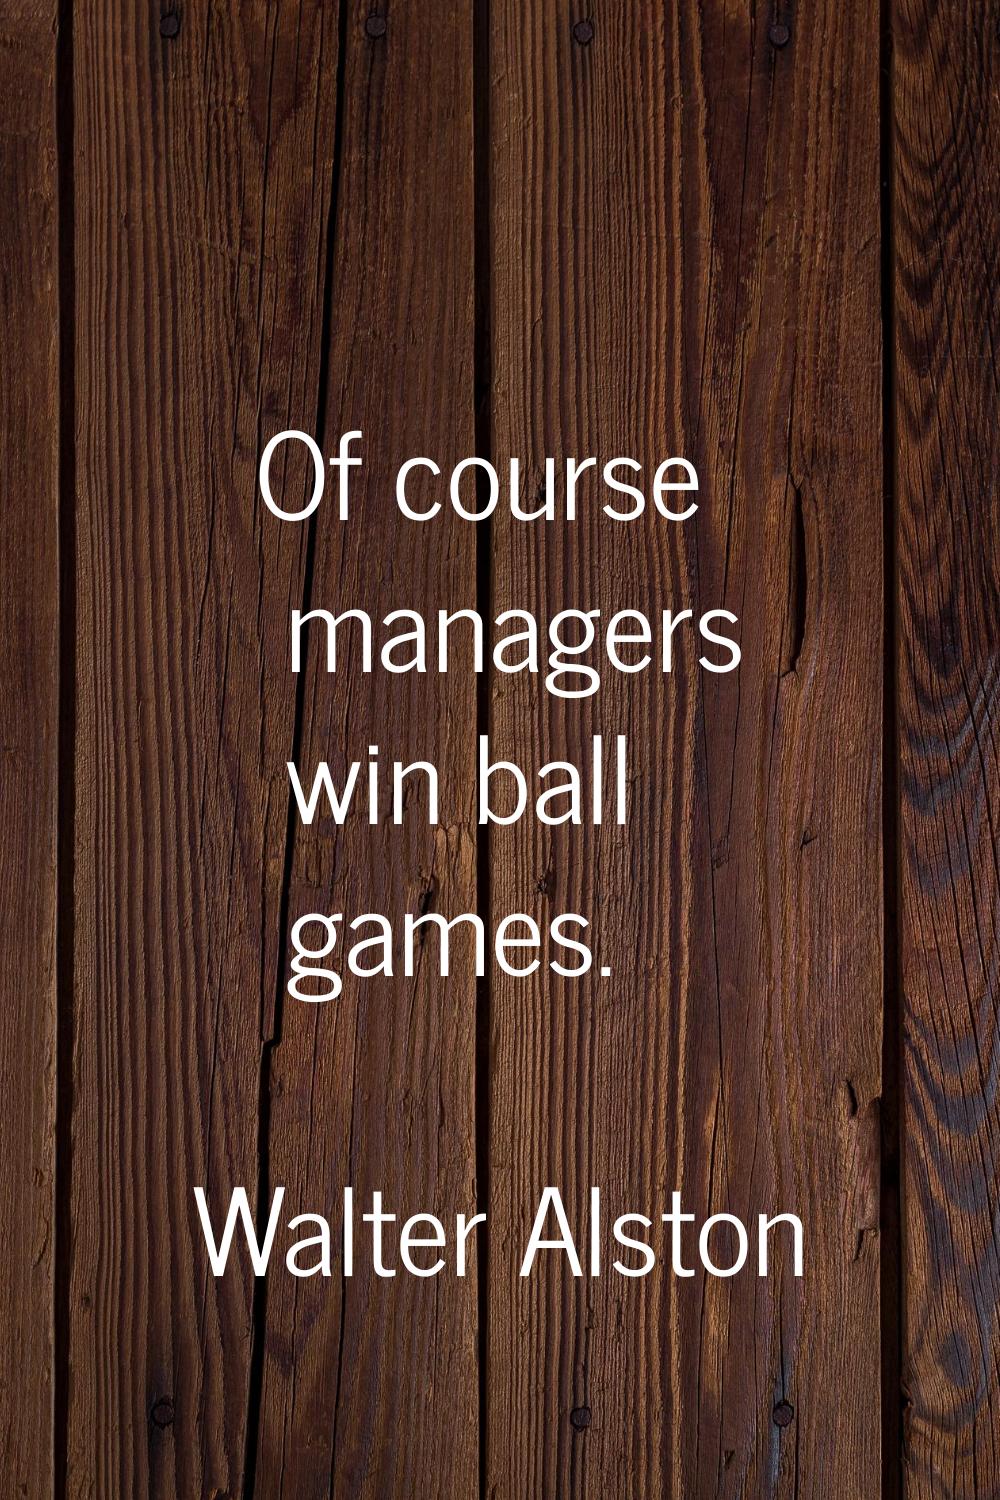 Of course managers win ball games.